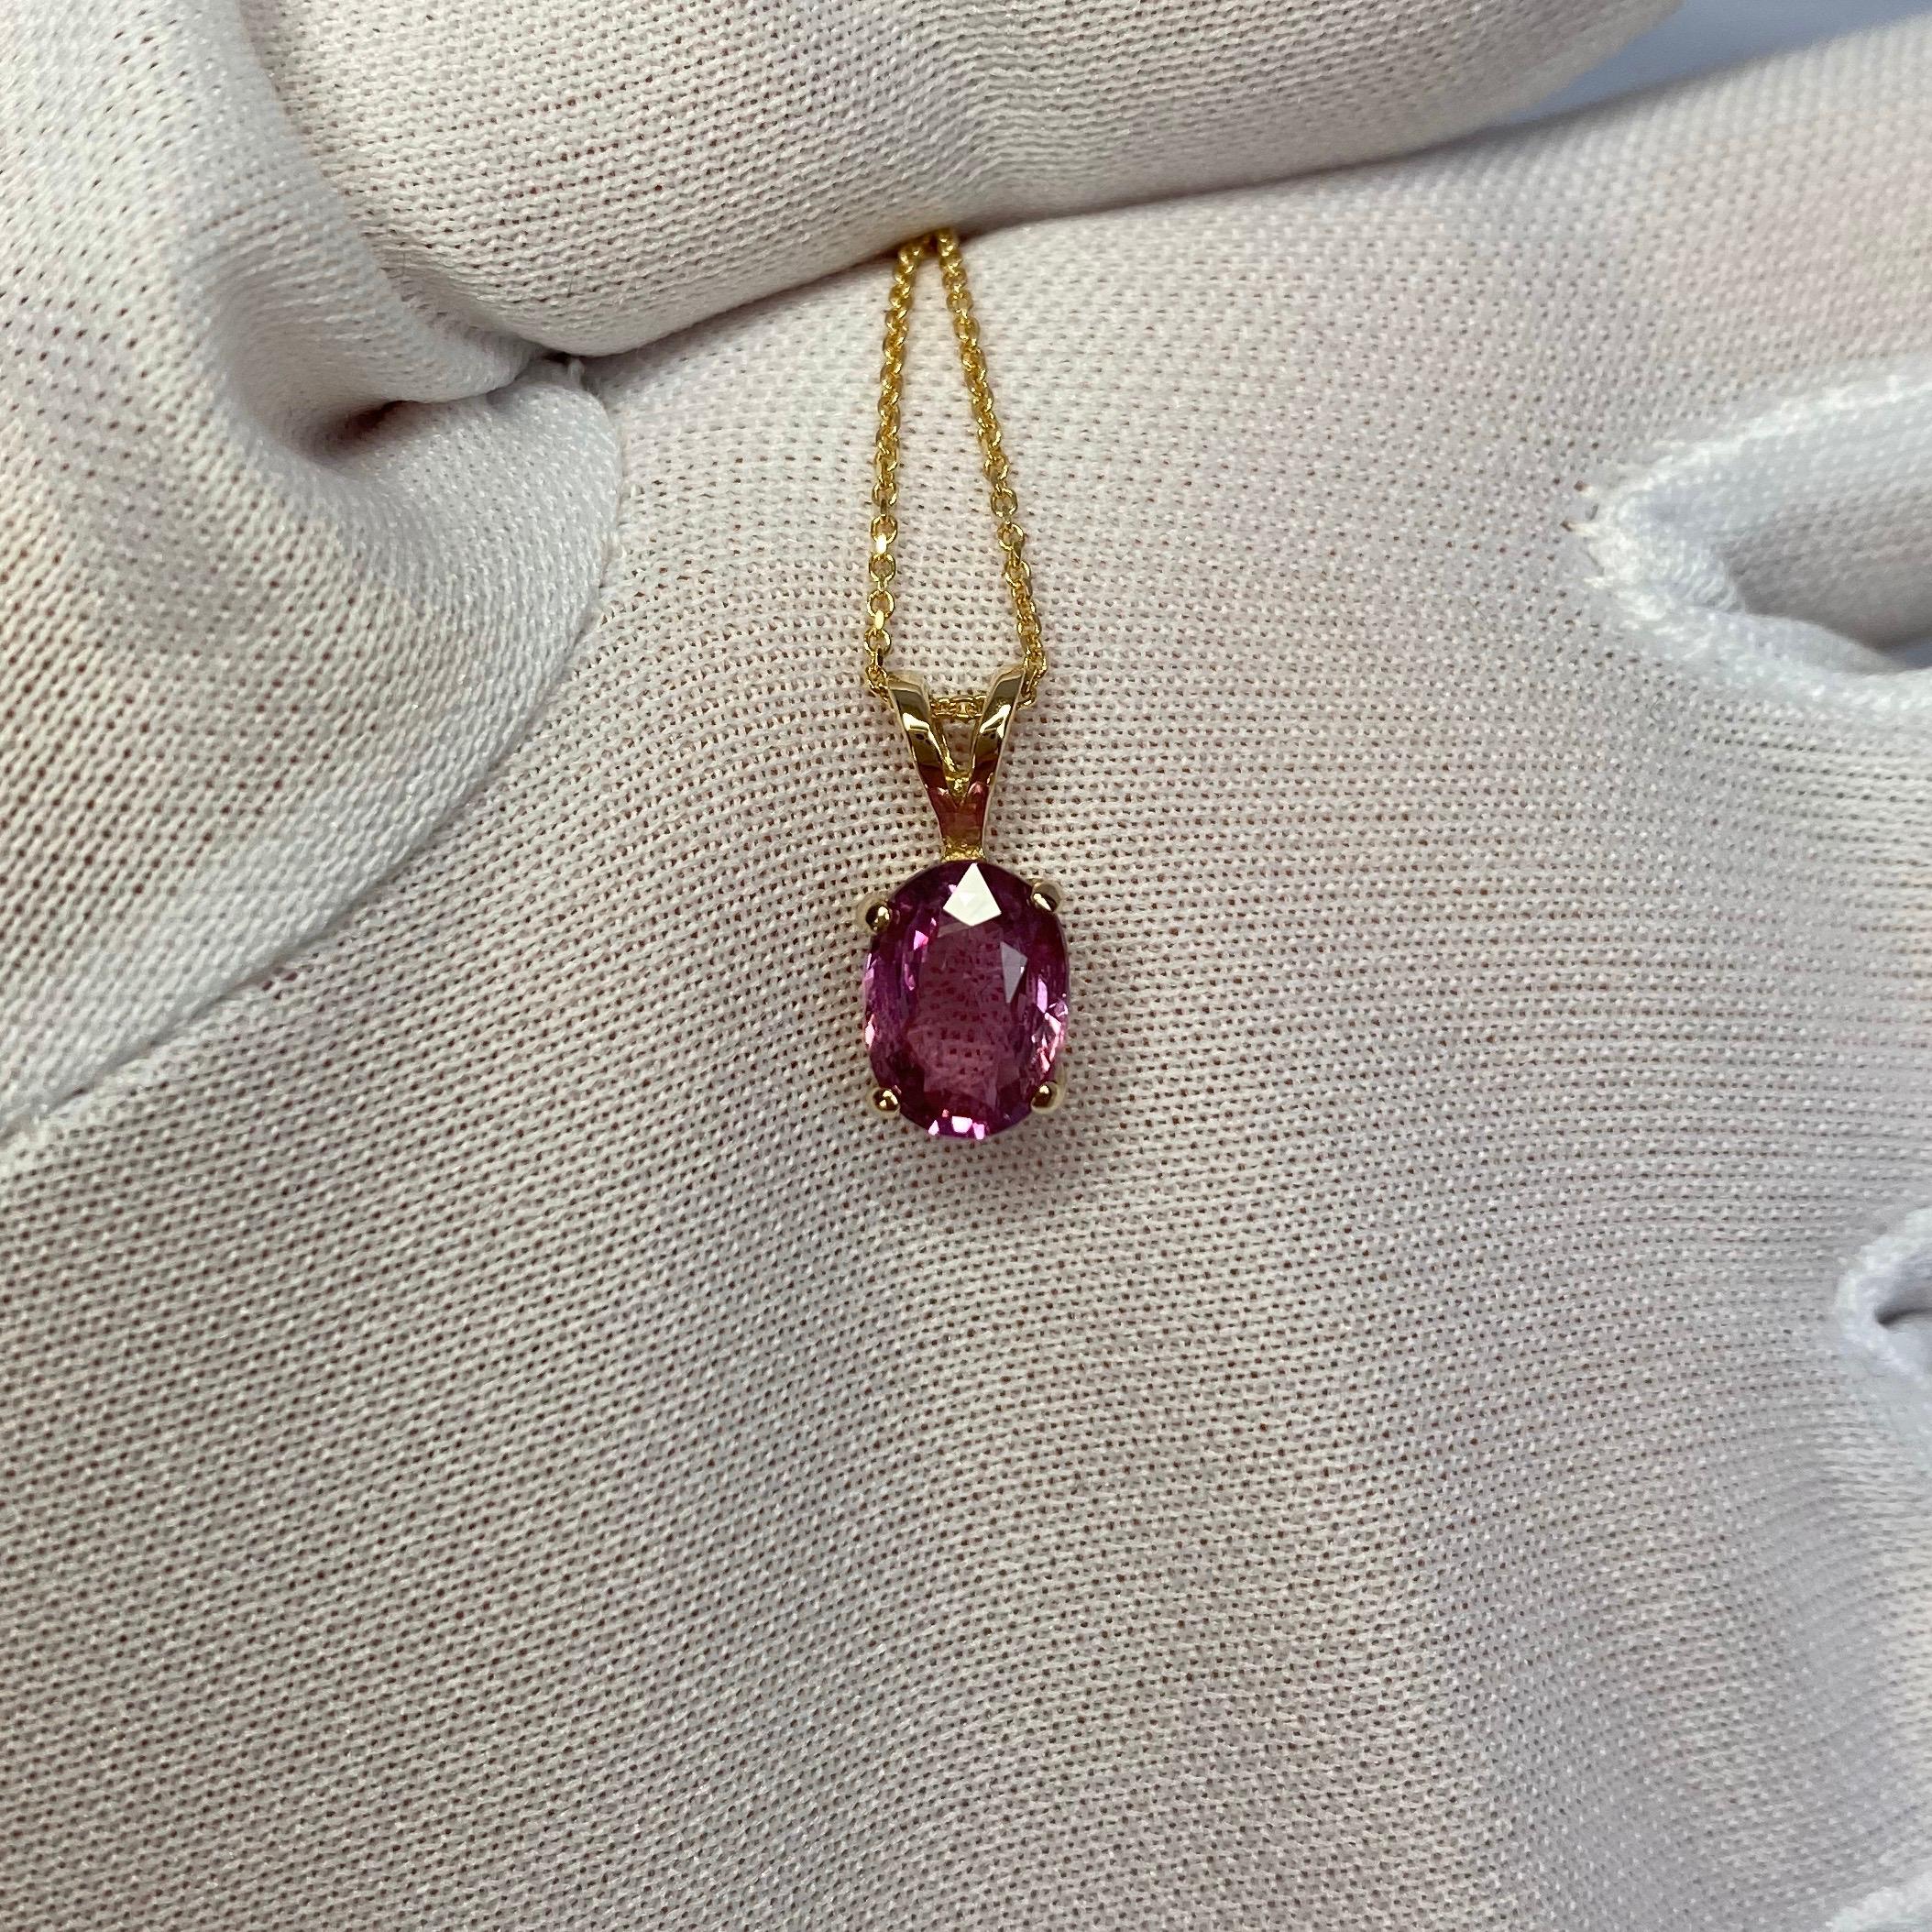 Natural untreated purplish pink sapphire solitaire pendant.
Beautiful oval cut Sapphire. Set in a fine 14k yellow gold pendant setting.

1.61 carat stone with a bright purplish pink colour and very good clarity. Some small natural inclusions visible